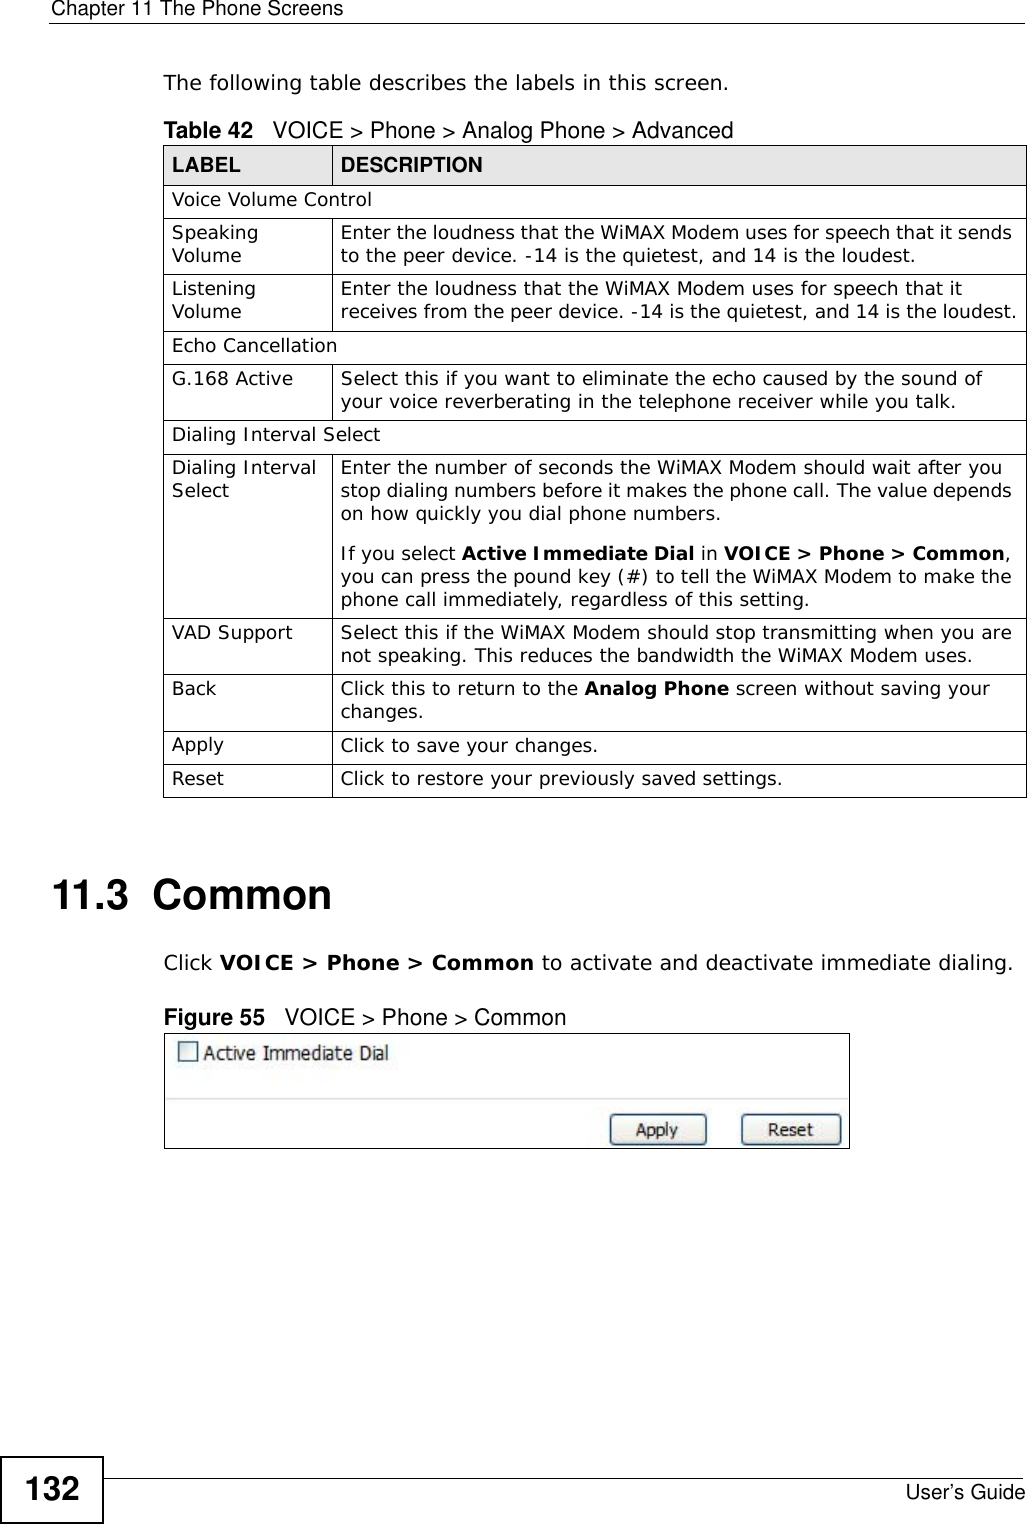 Chapter 11 The Phone ScreensUser’s Guide132The following table describes the labels in this screen.11.3  CommonClick VOICE &gt; Phone &gt; Common to activate and deactivate immediate dialing.Figure 55   VOICE &gt; Phone &gt; CommonTable 42   VOICE &gt; Phone &gt; Analog Phone &gt; AdvancedLABEL DESCRIPTIONVoice Volume ControlSpeaking Volume Enter the loudness that the WiMAX Modem uses for speech that it sends to the peer device. -14 is the quietest, and 14 is the loudest.Listening Volume Enter the loudness that the WiMAX Modem uses for speech that it receives from the peer device. -14 is the quietest, and 14 is the loudest.Echo CancellationG.168 Active Select this if you want to eliminate the echo caused by the sound of your voice reverberating in the telephone receiver while you talk.Dialing Interval SelectDialing Interval Select Enter the number of seconds the WiMAX Modem should wait after you stop dialing numbers before it makes the phone call. The value depends on how quickly you dial phone numbers.If you select Active Immediate Dial in VOICE &gt; Phone &gt; Common, you can press the pound key (#) to tell the WiMAX Modem to make the phone call immediately, regardless of this setting.VAD Support Select this if the WiMAX Modem should stop transmitting when you are not speaking. This reduces the bandwidth the WiMAX Modem uses.Back Click this to return to the Analog Phone screen without saving your changes.Apply Click to save your changes.Reset Click to restore your previously saved settings.